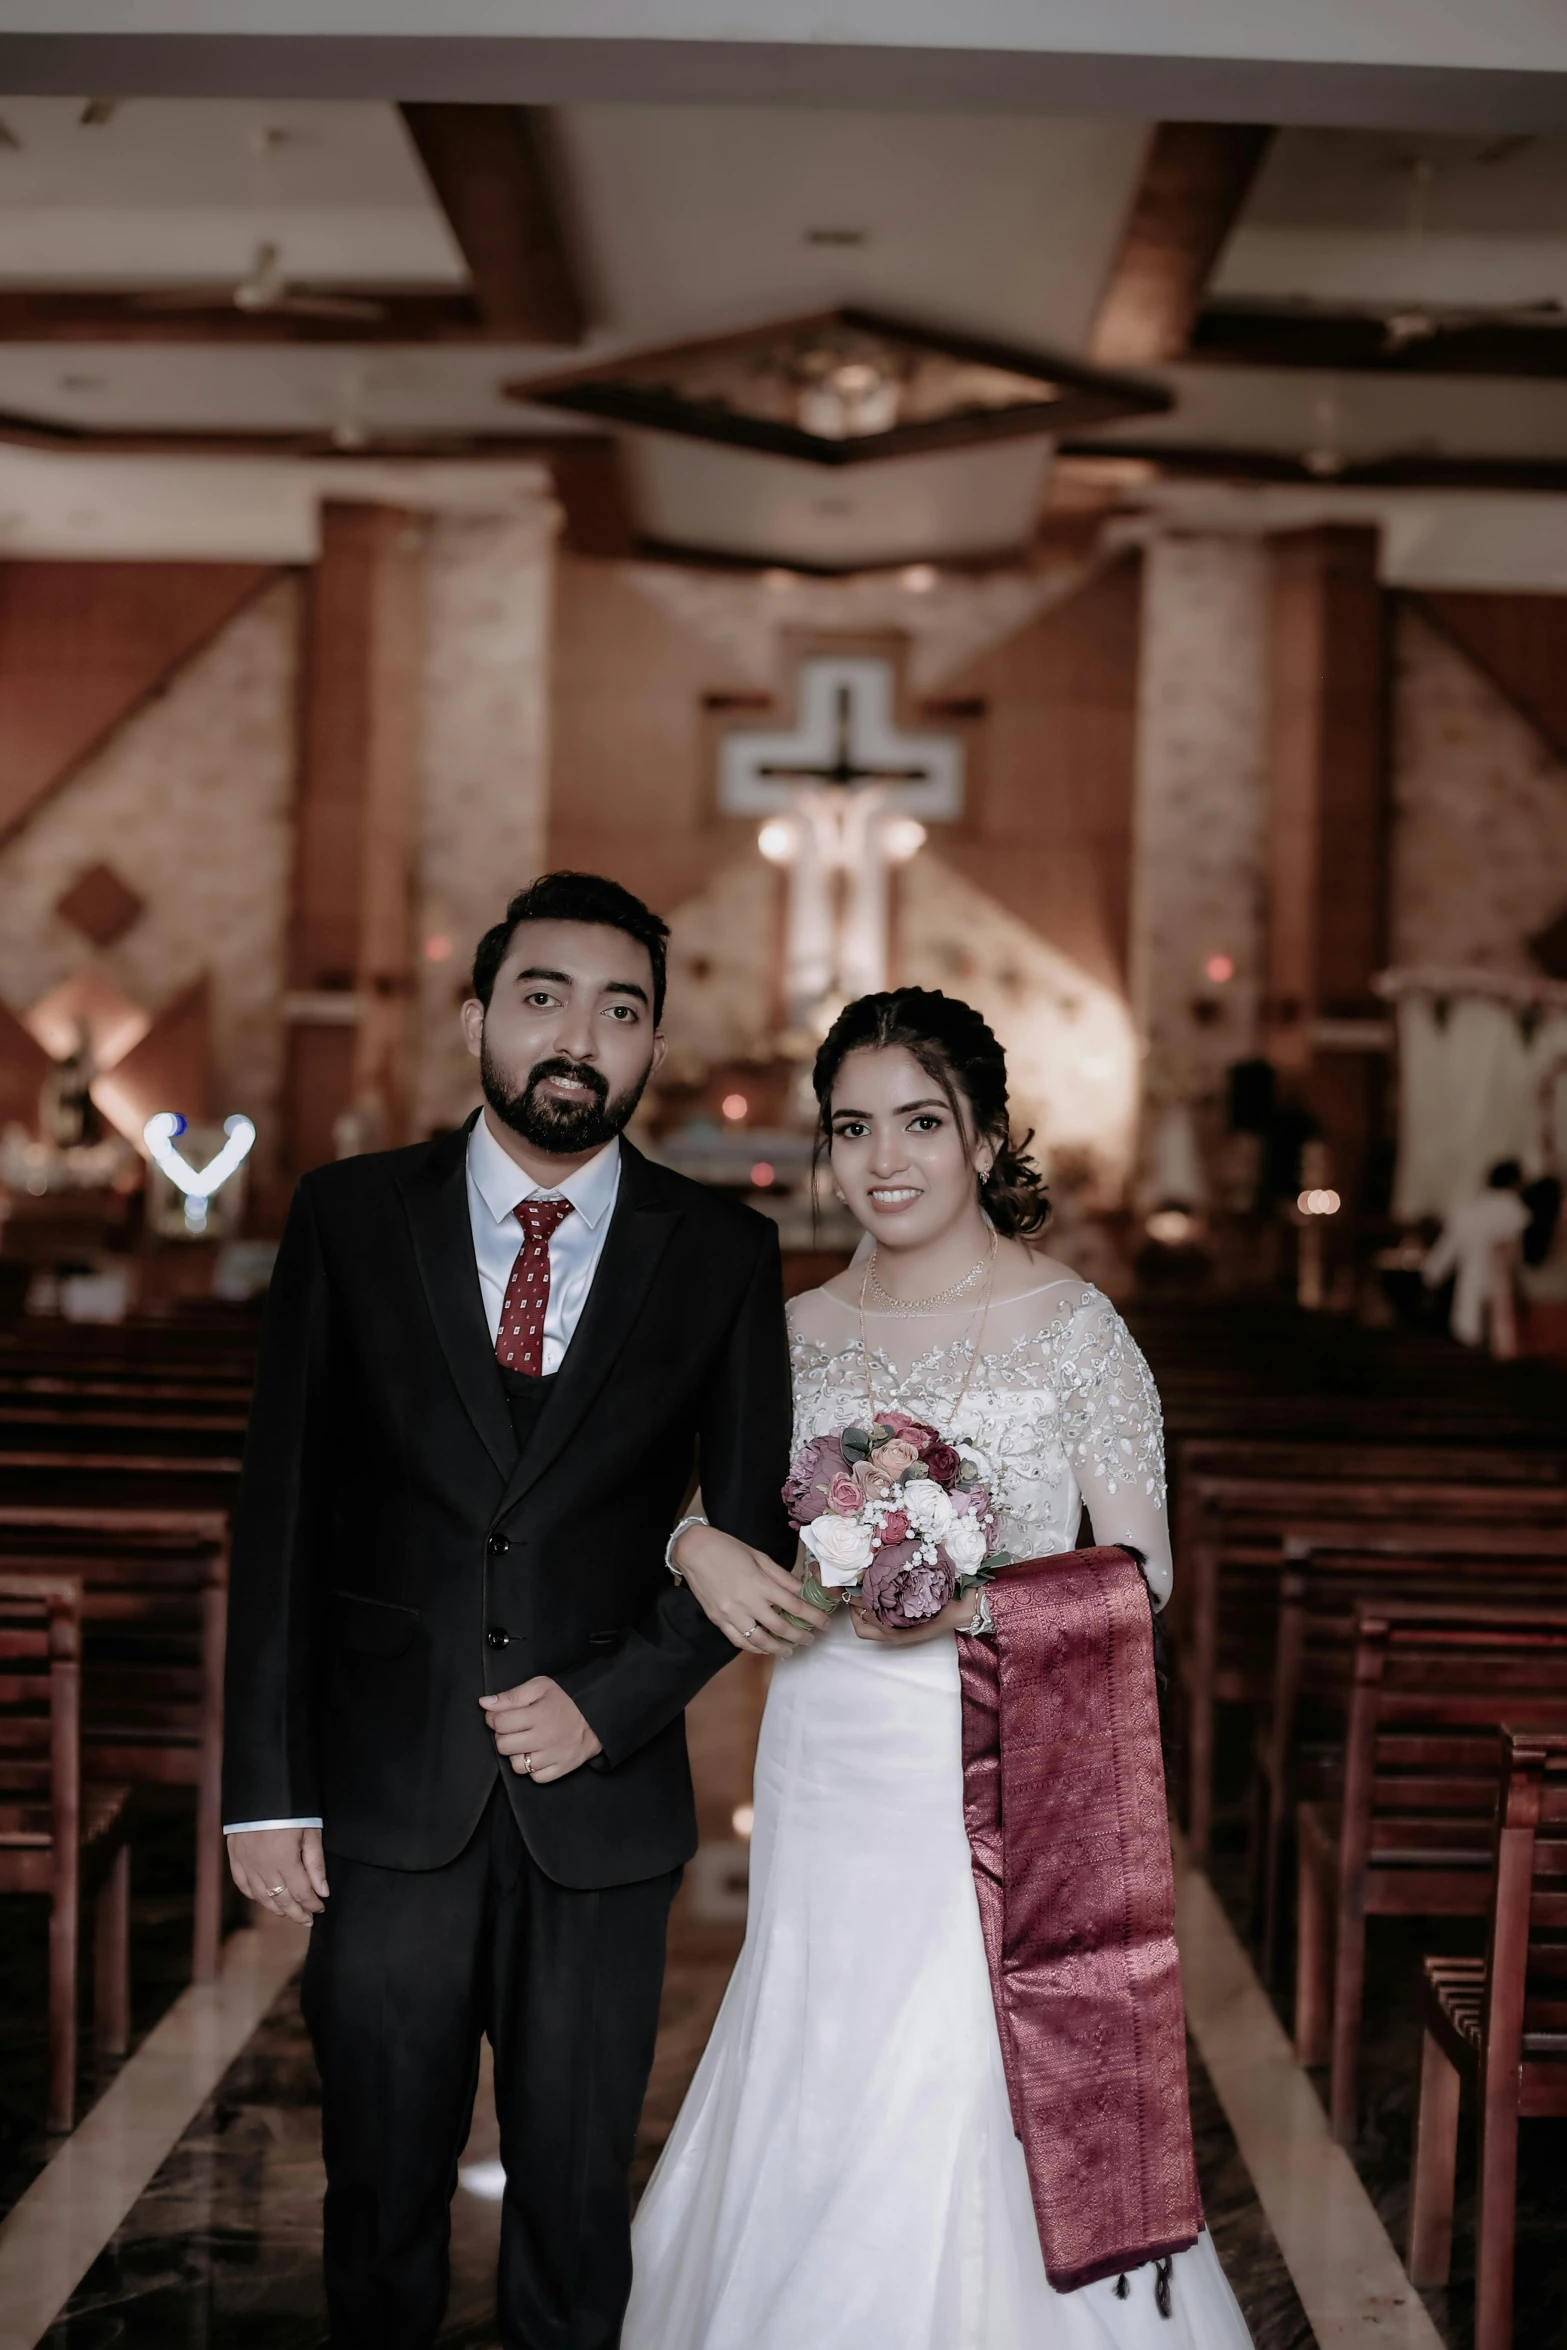 a man and woman in wedding clothes standing in front of pews